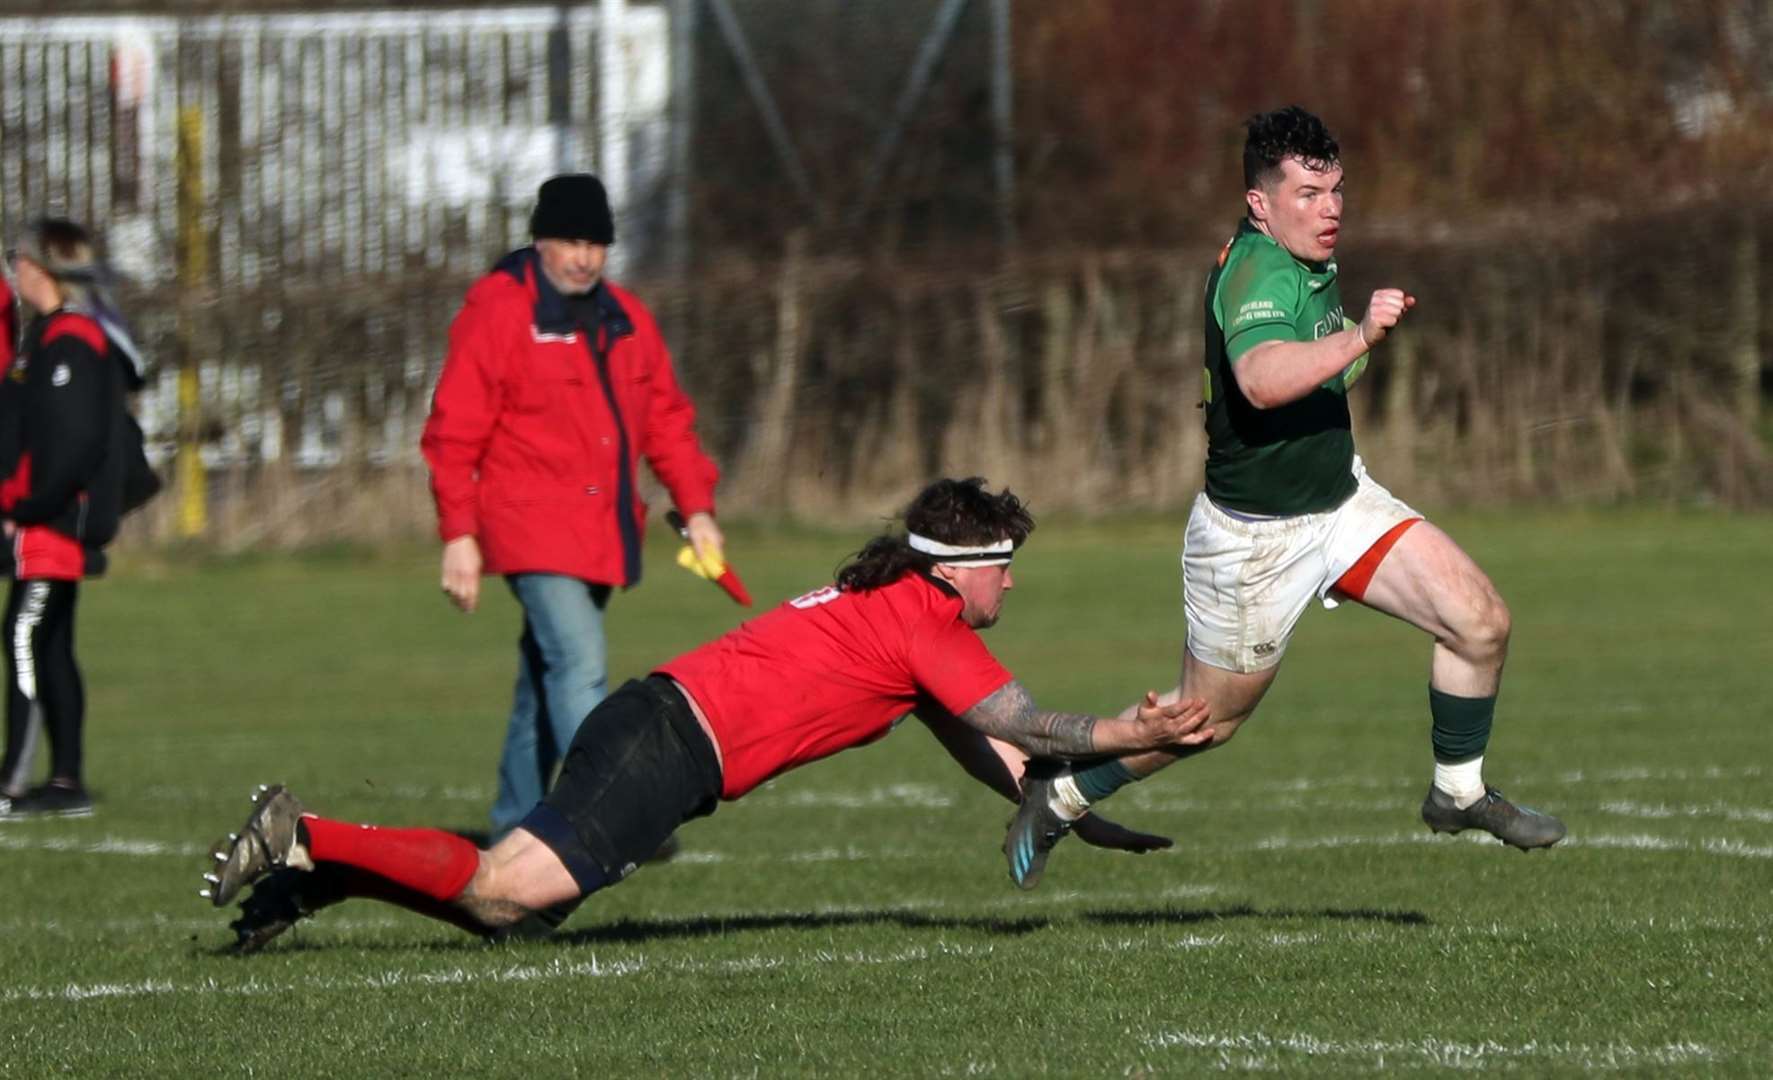 The defeat to Glenrothes came a week after Caithness had beaten them 75-8 in Thurso. Here, Charlie Quinn evades an opponent during the Millbank game. Picture: James Gunn